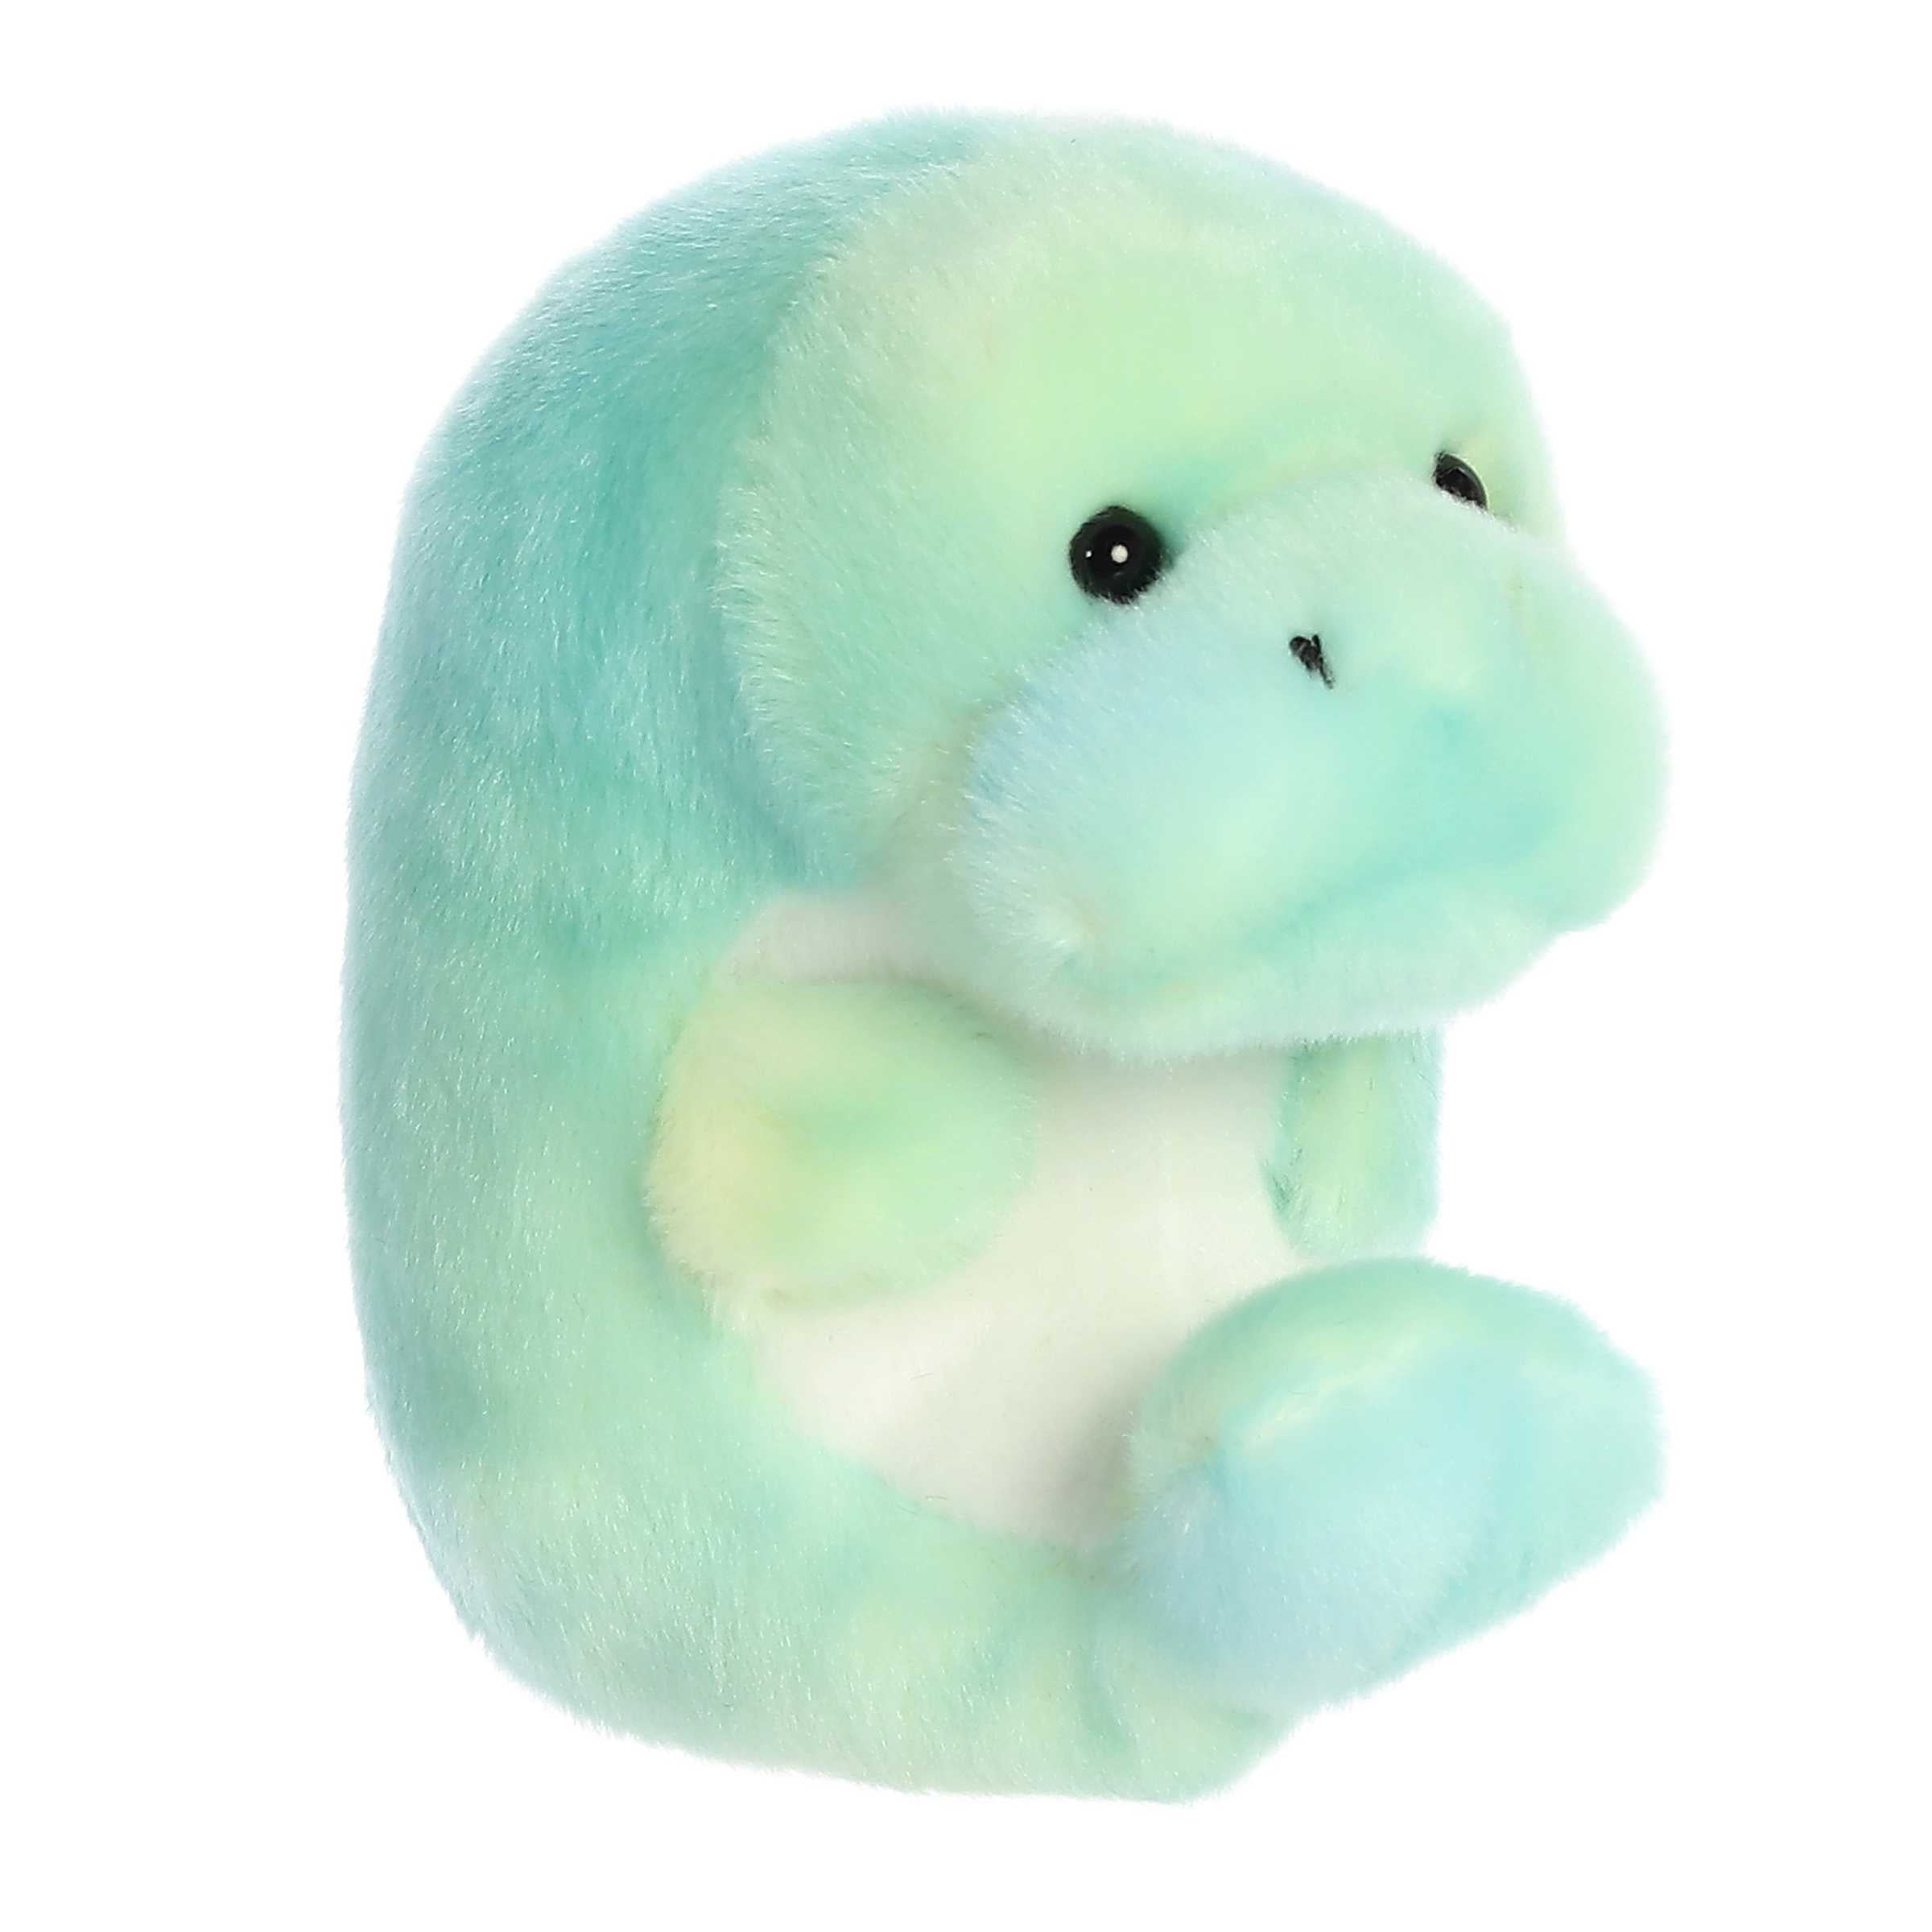 Pastel-colored manatee plush with friendly face and flipper-like arms, crafted with attention to detail, by Aurora plush.